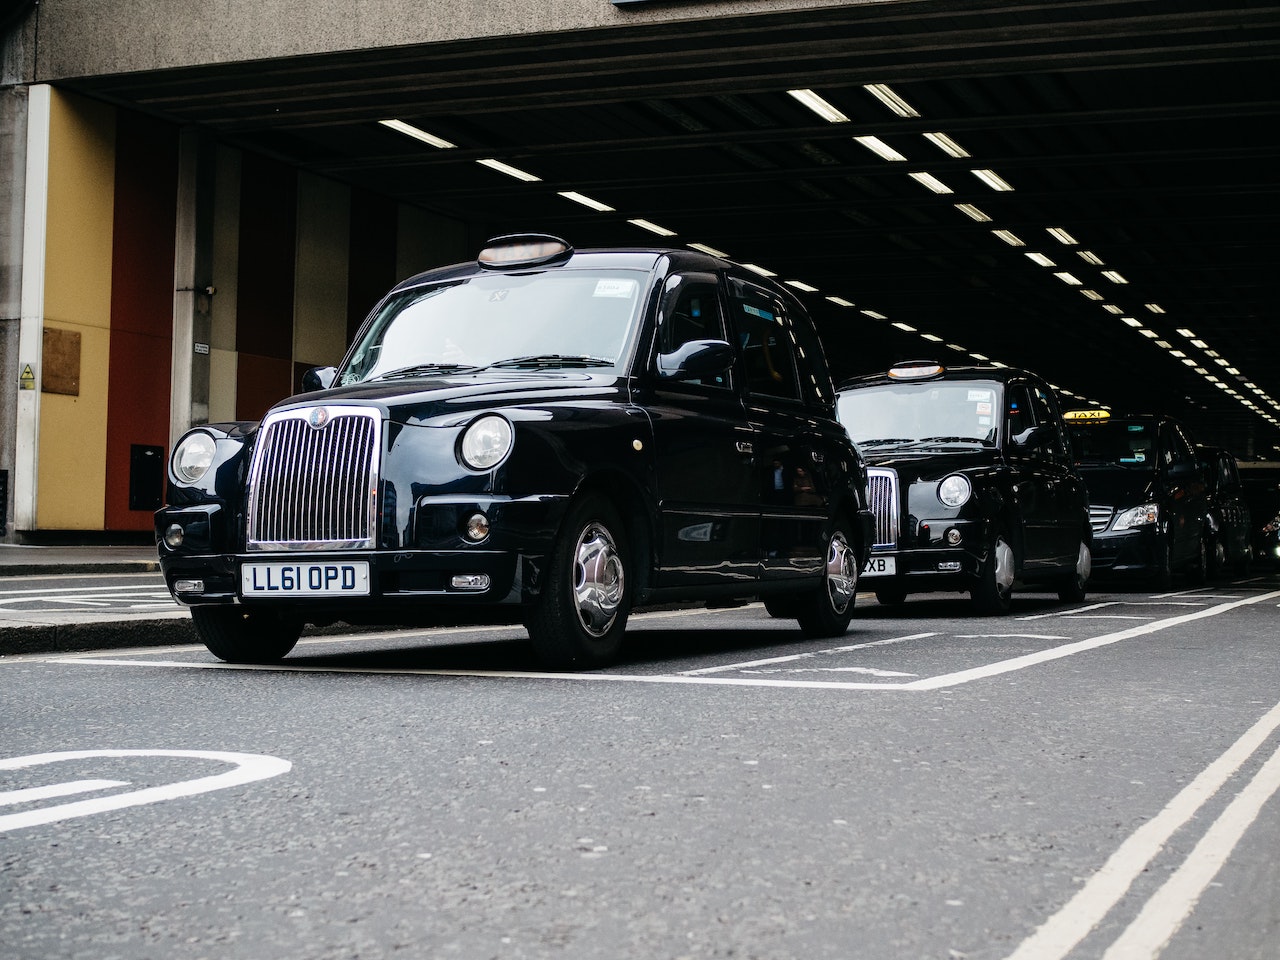 Want Your Own Black Cab Business? Here’s What You Need to Do